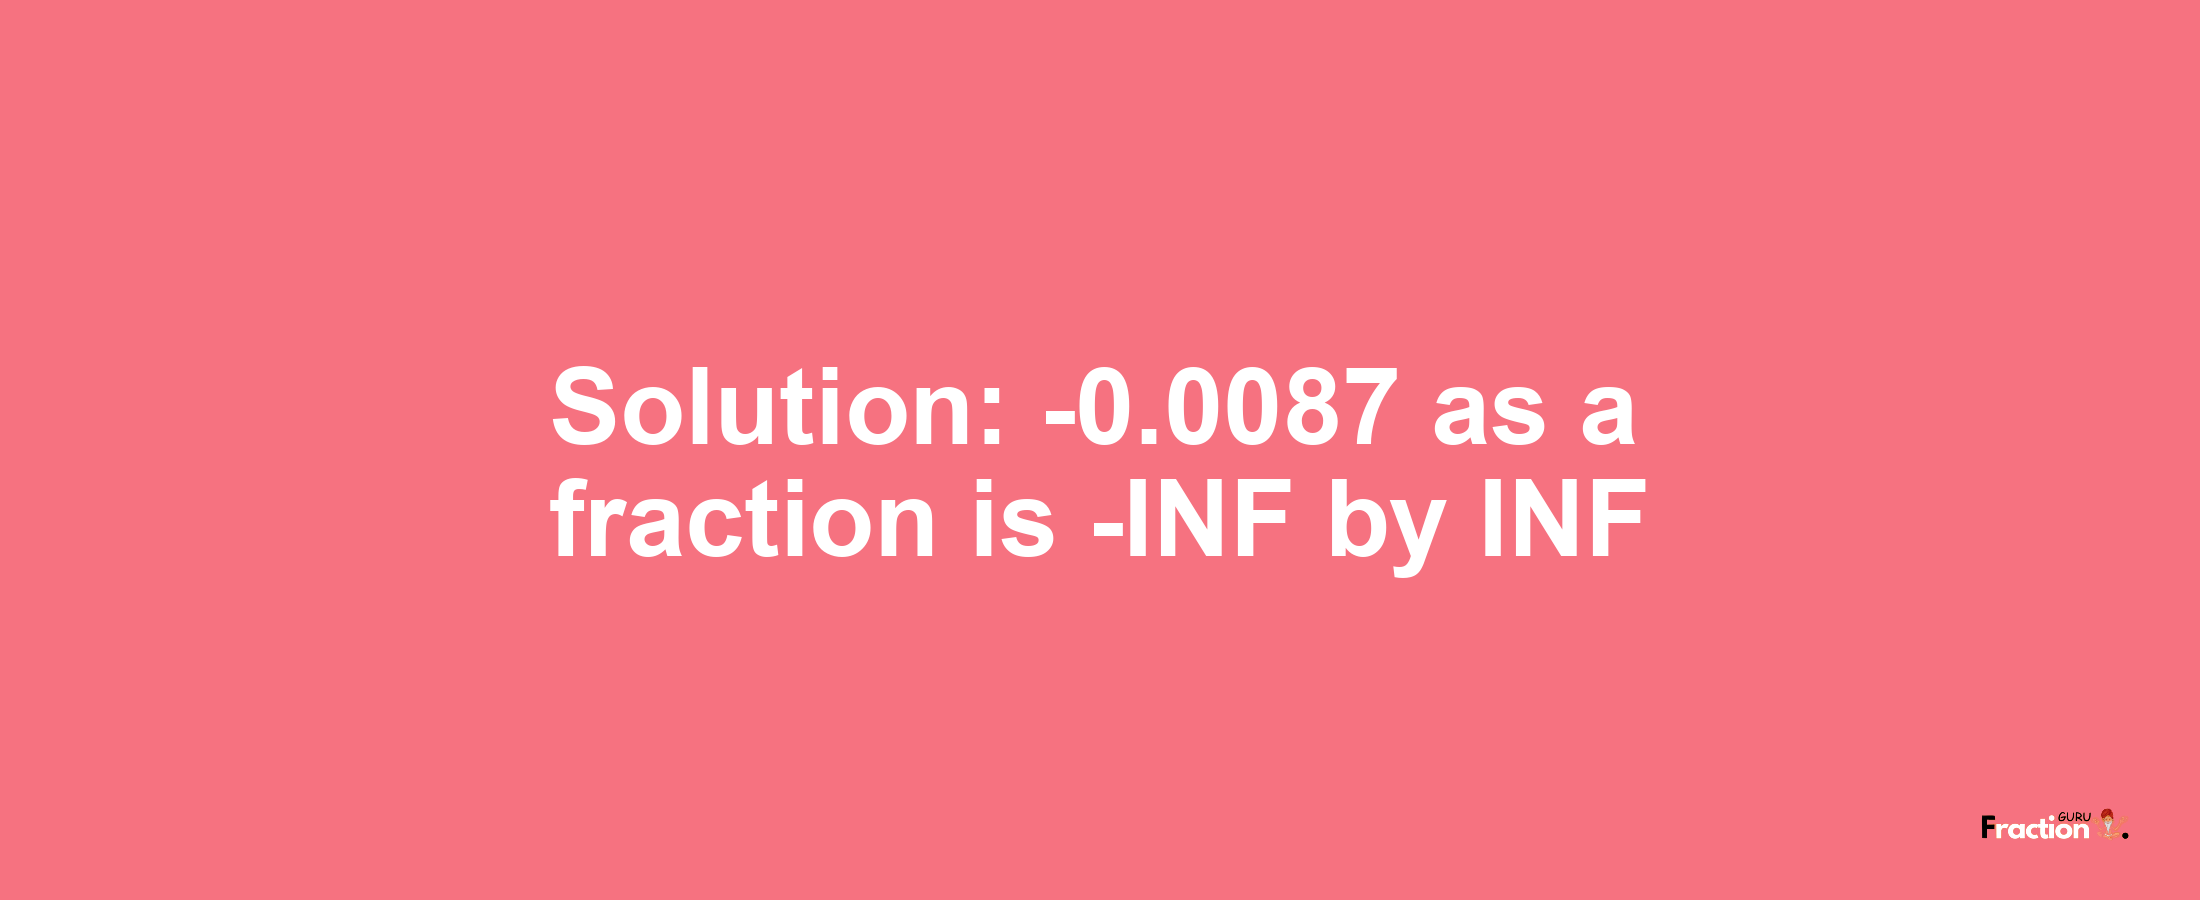 Solution:-0.0087 as a fraction is -INF/INF